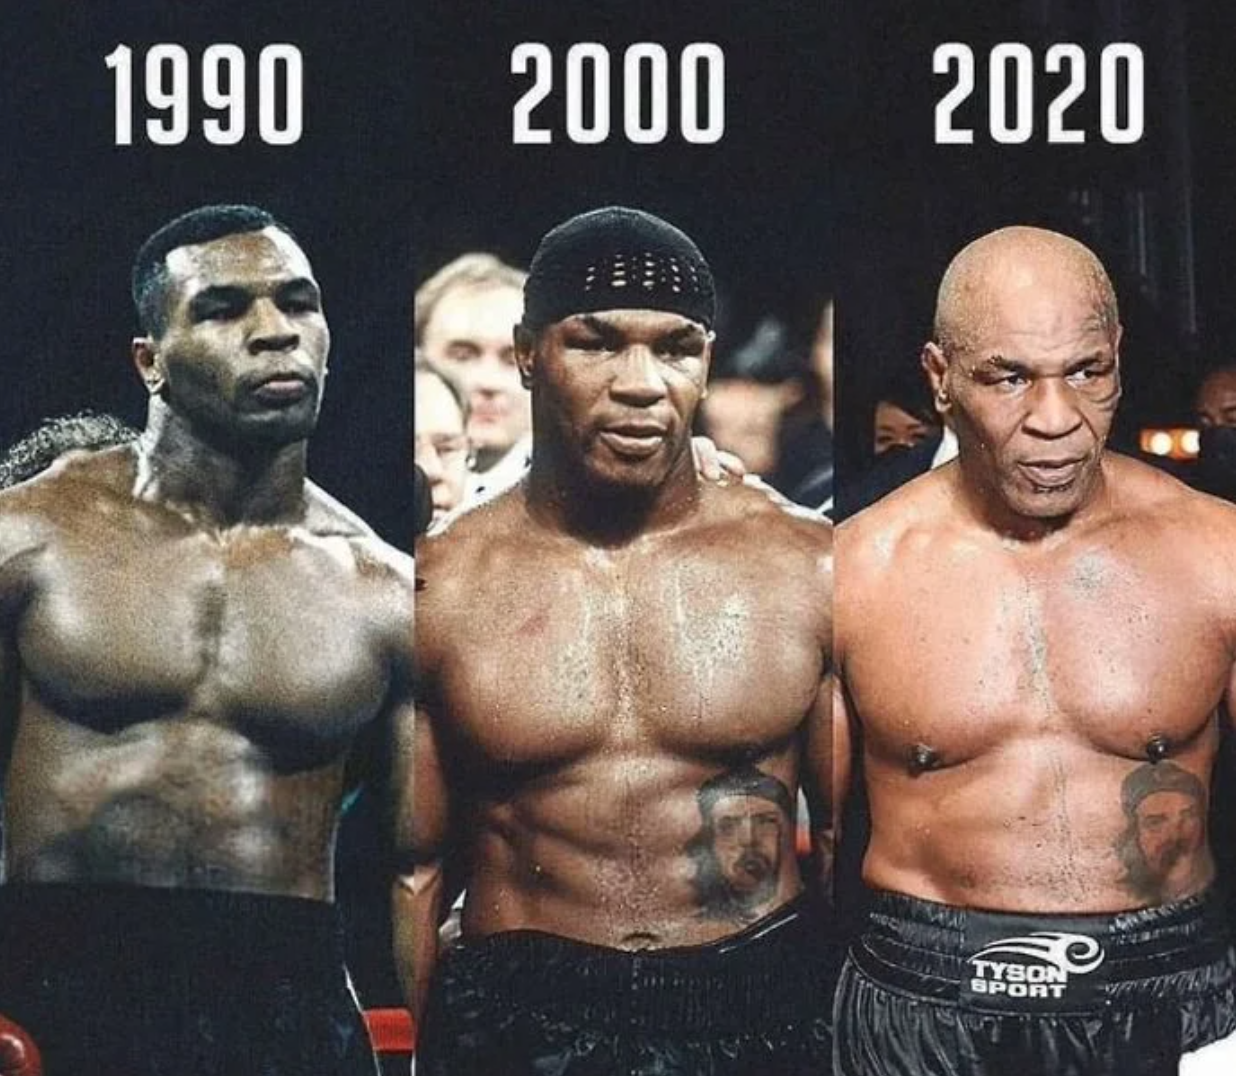 Mike Tyson's 30-year body transformation